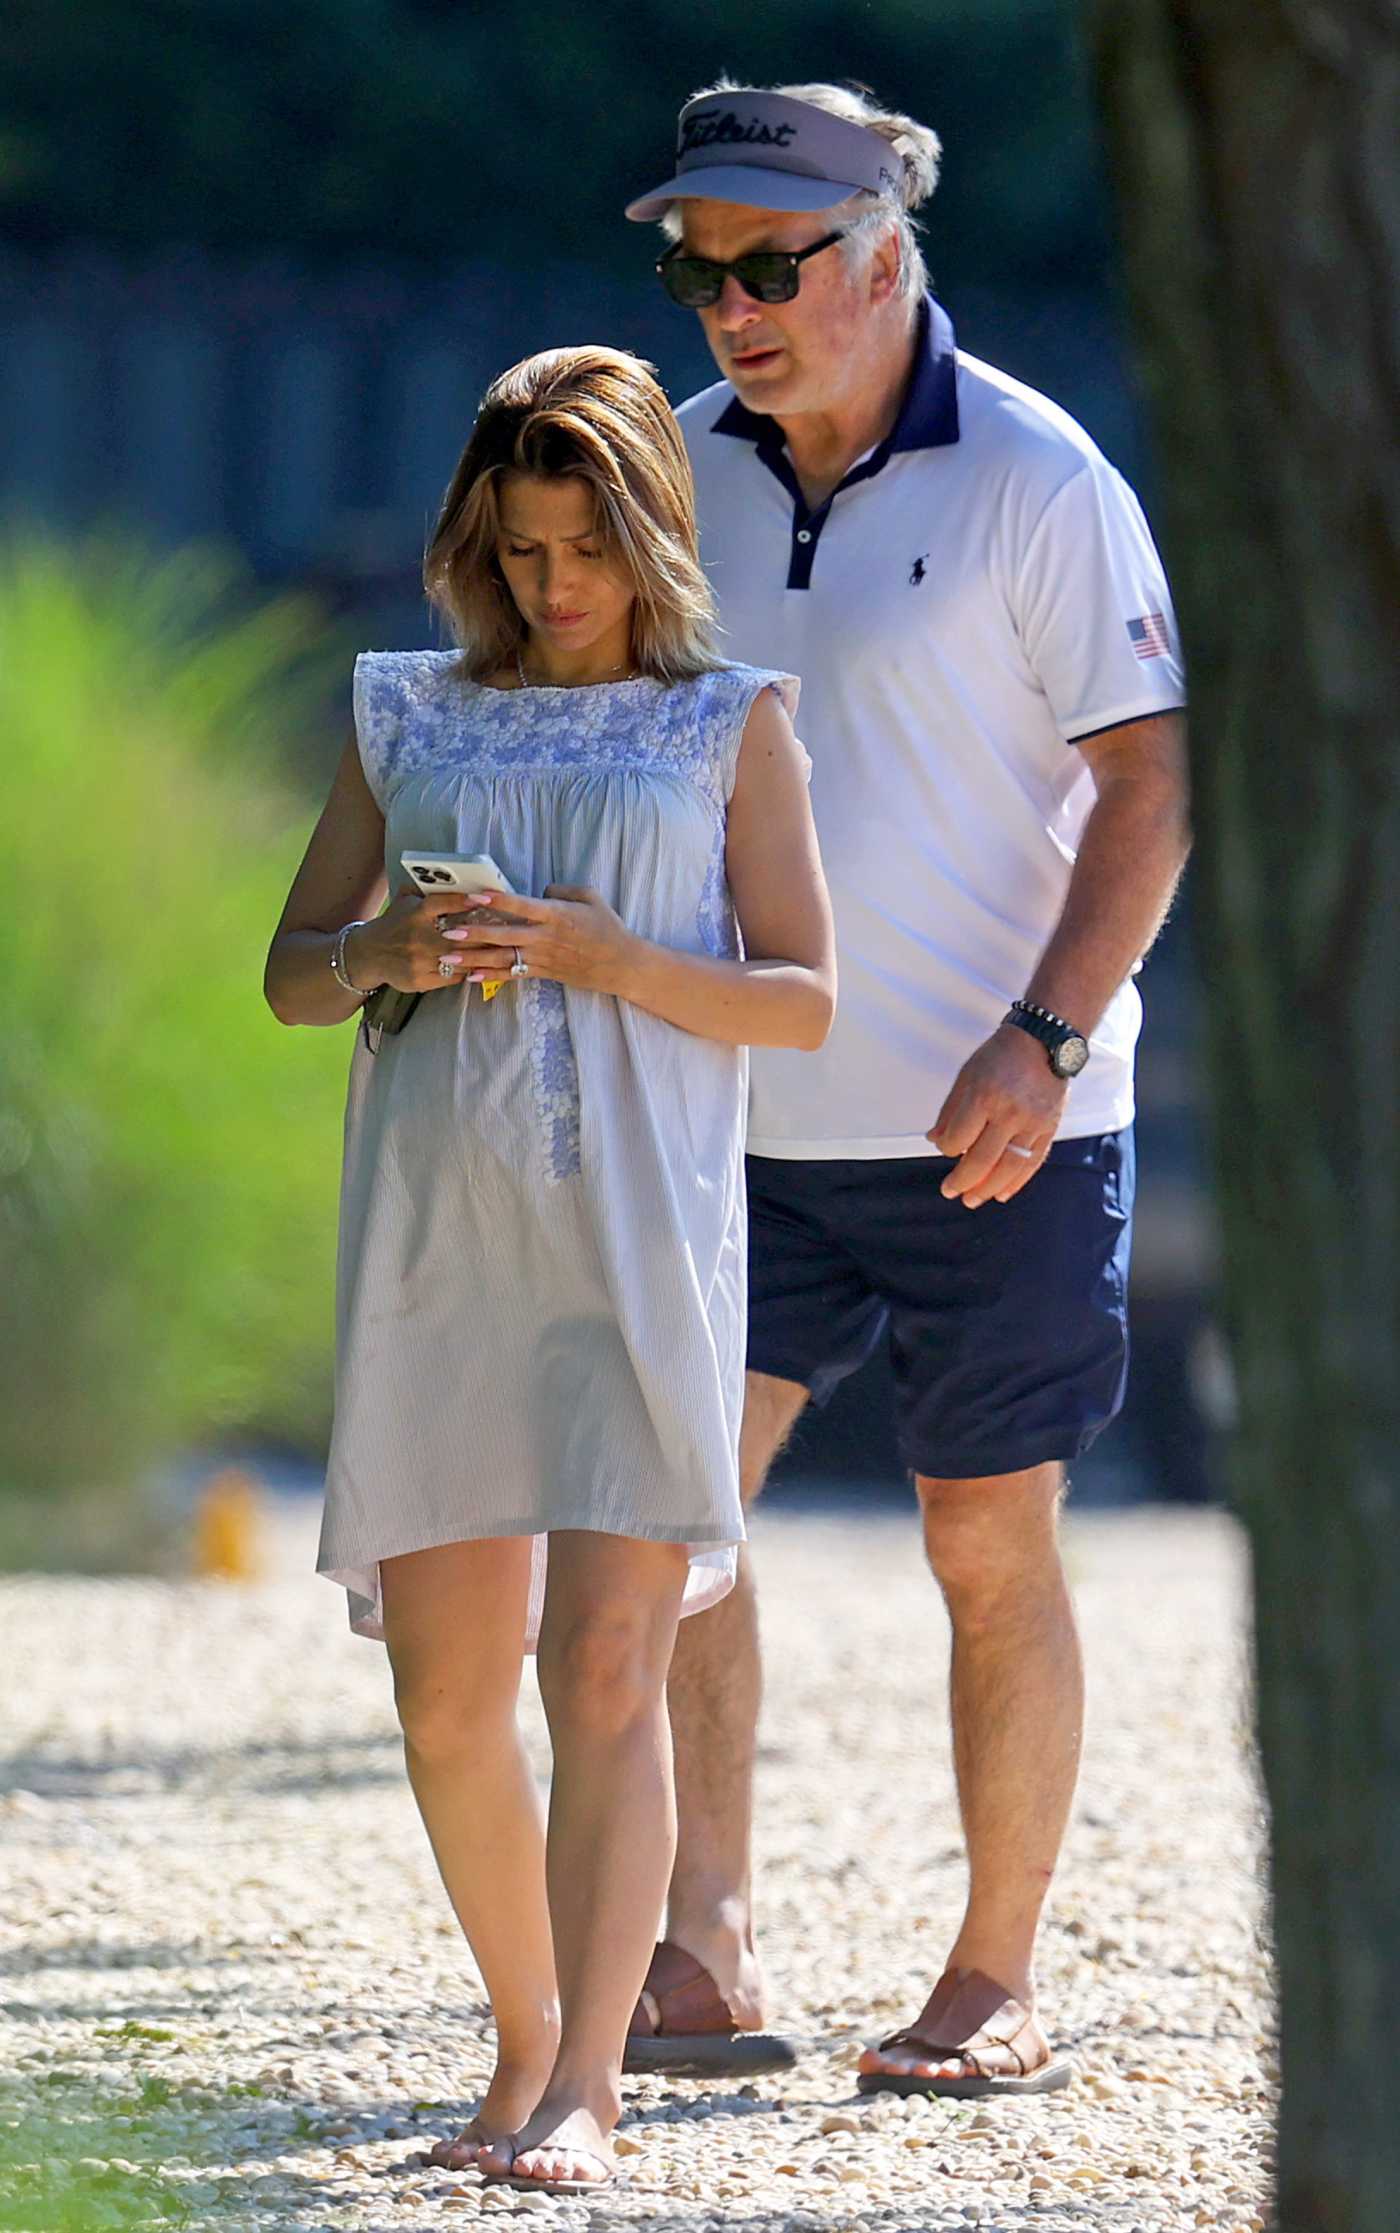 Hilaria Baldwin Was Seen Out with Alec Baldwin in the Hamptons in New York 06/30/2022